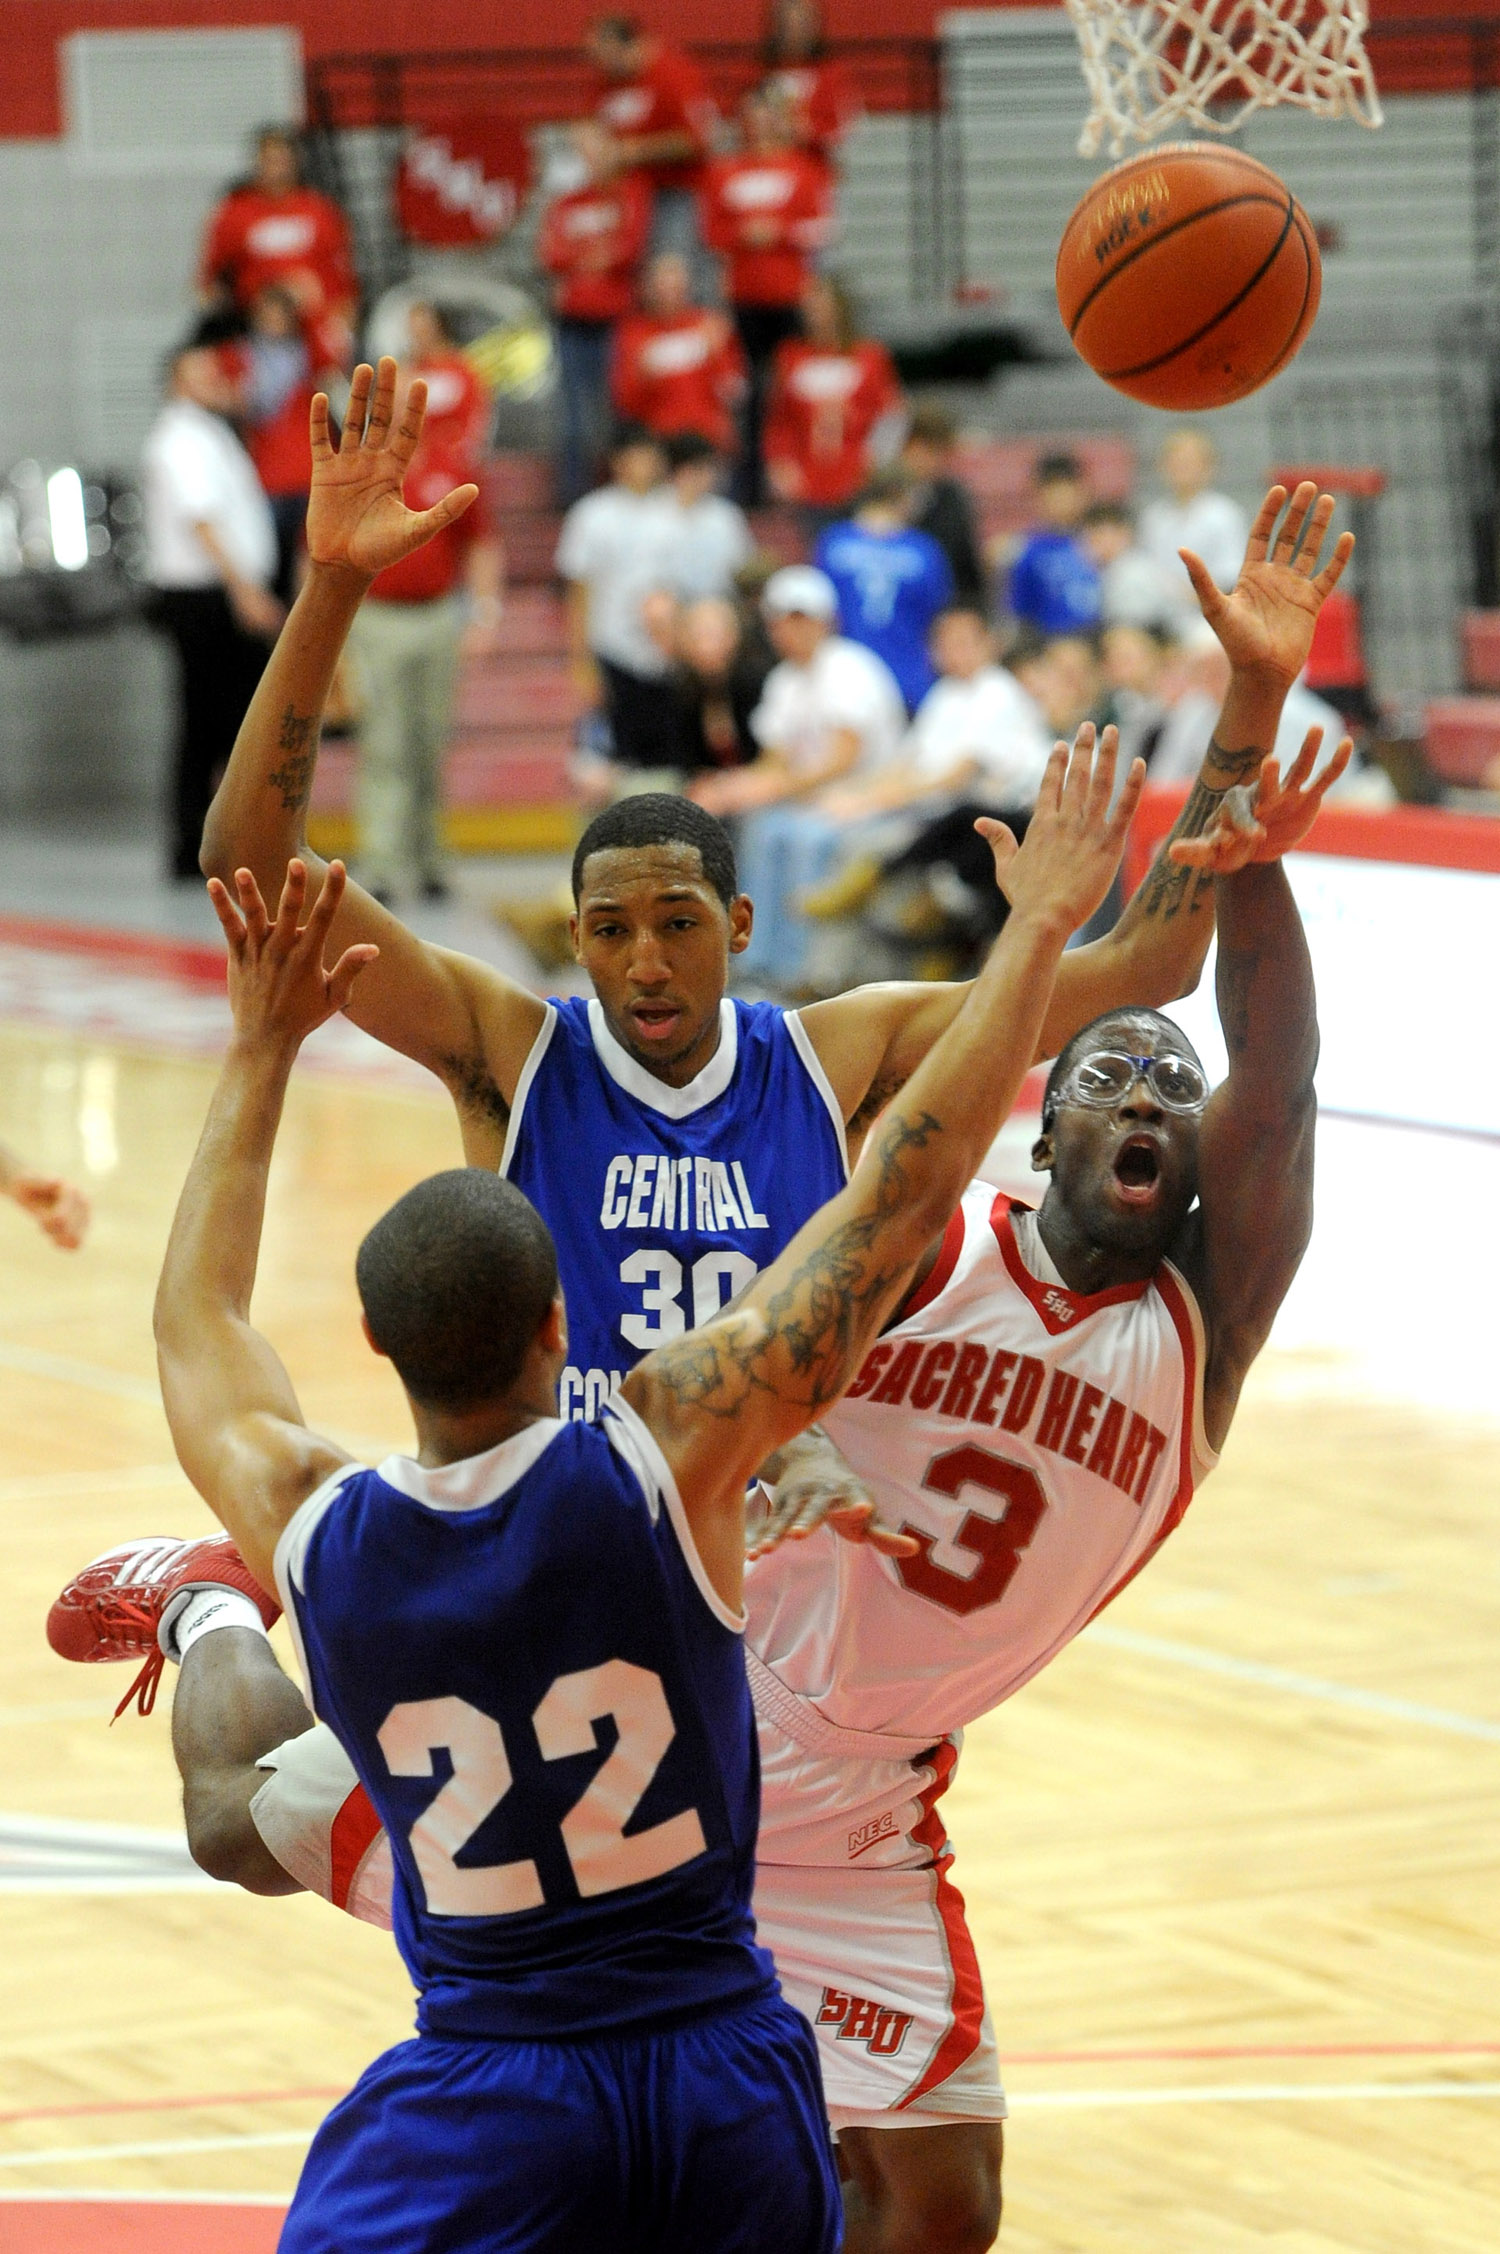  Sacred Heart University's Jerrell Thompson puts up a shot as he is defended by Ken Horton, back, and Devan Bailey, front, at CCSU in Fairfield on January 13, 2011. 